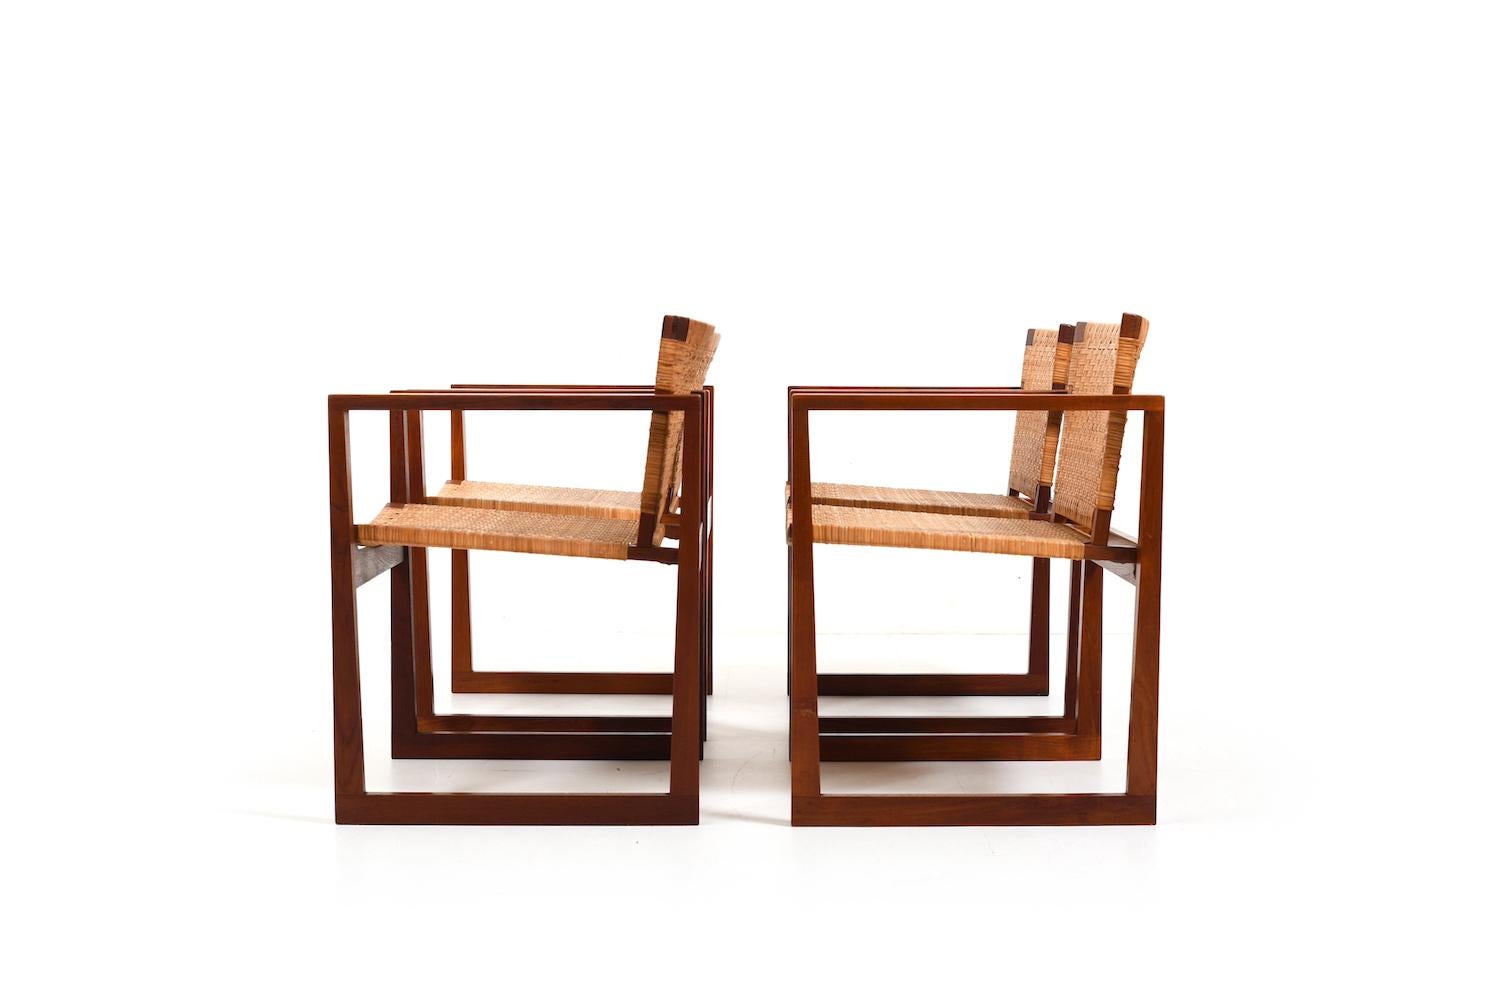 Rare Danish Teak and Cane Dining Set 1960s For Sale 10